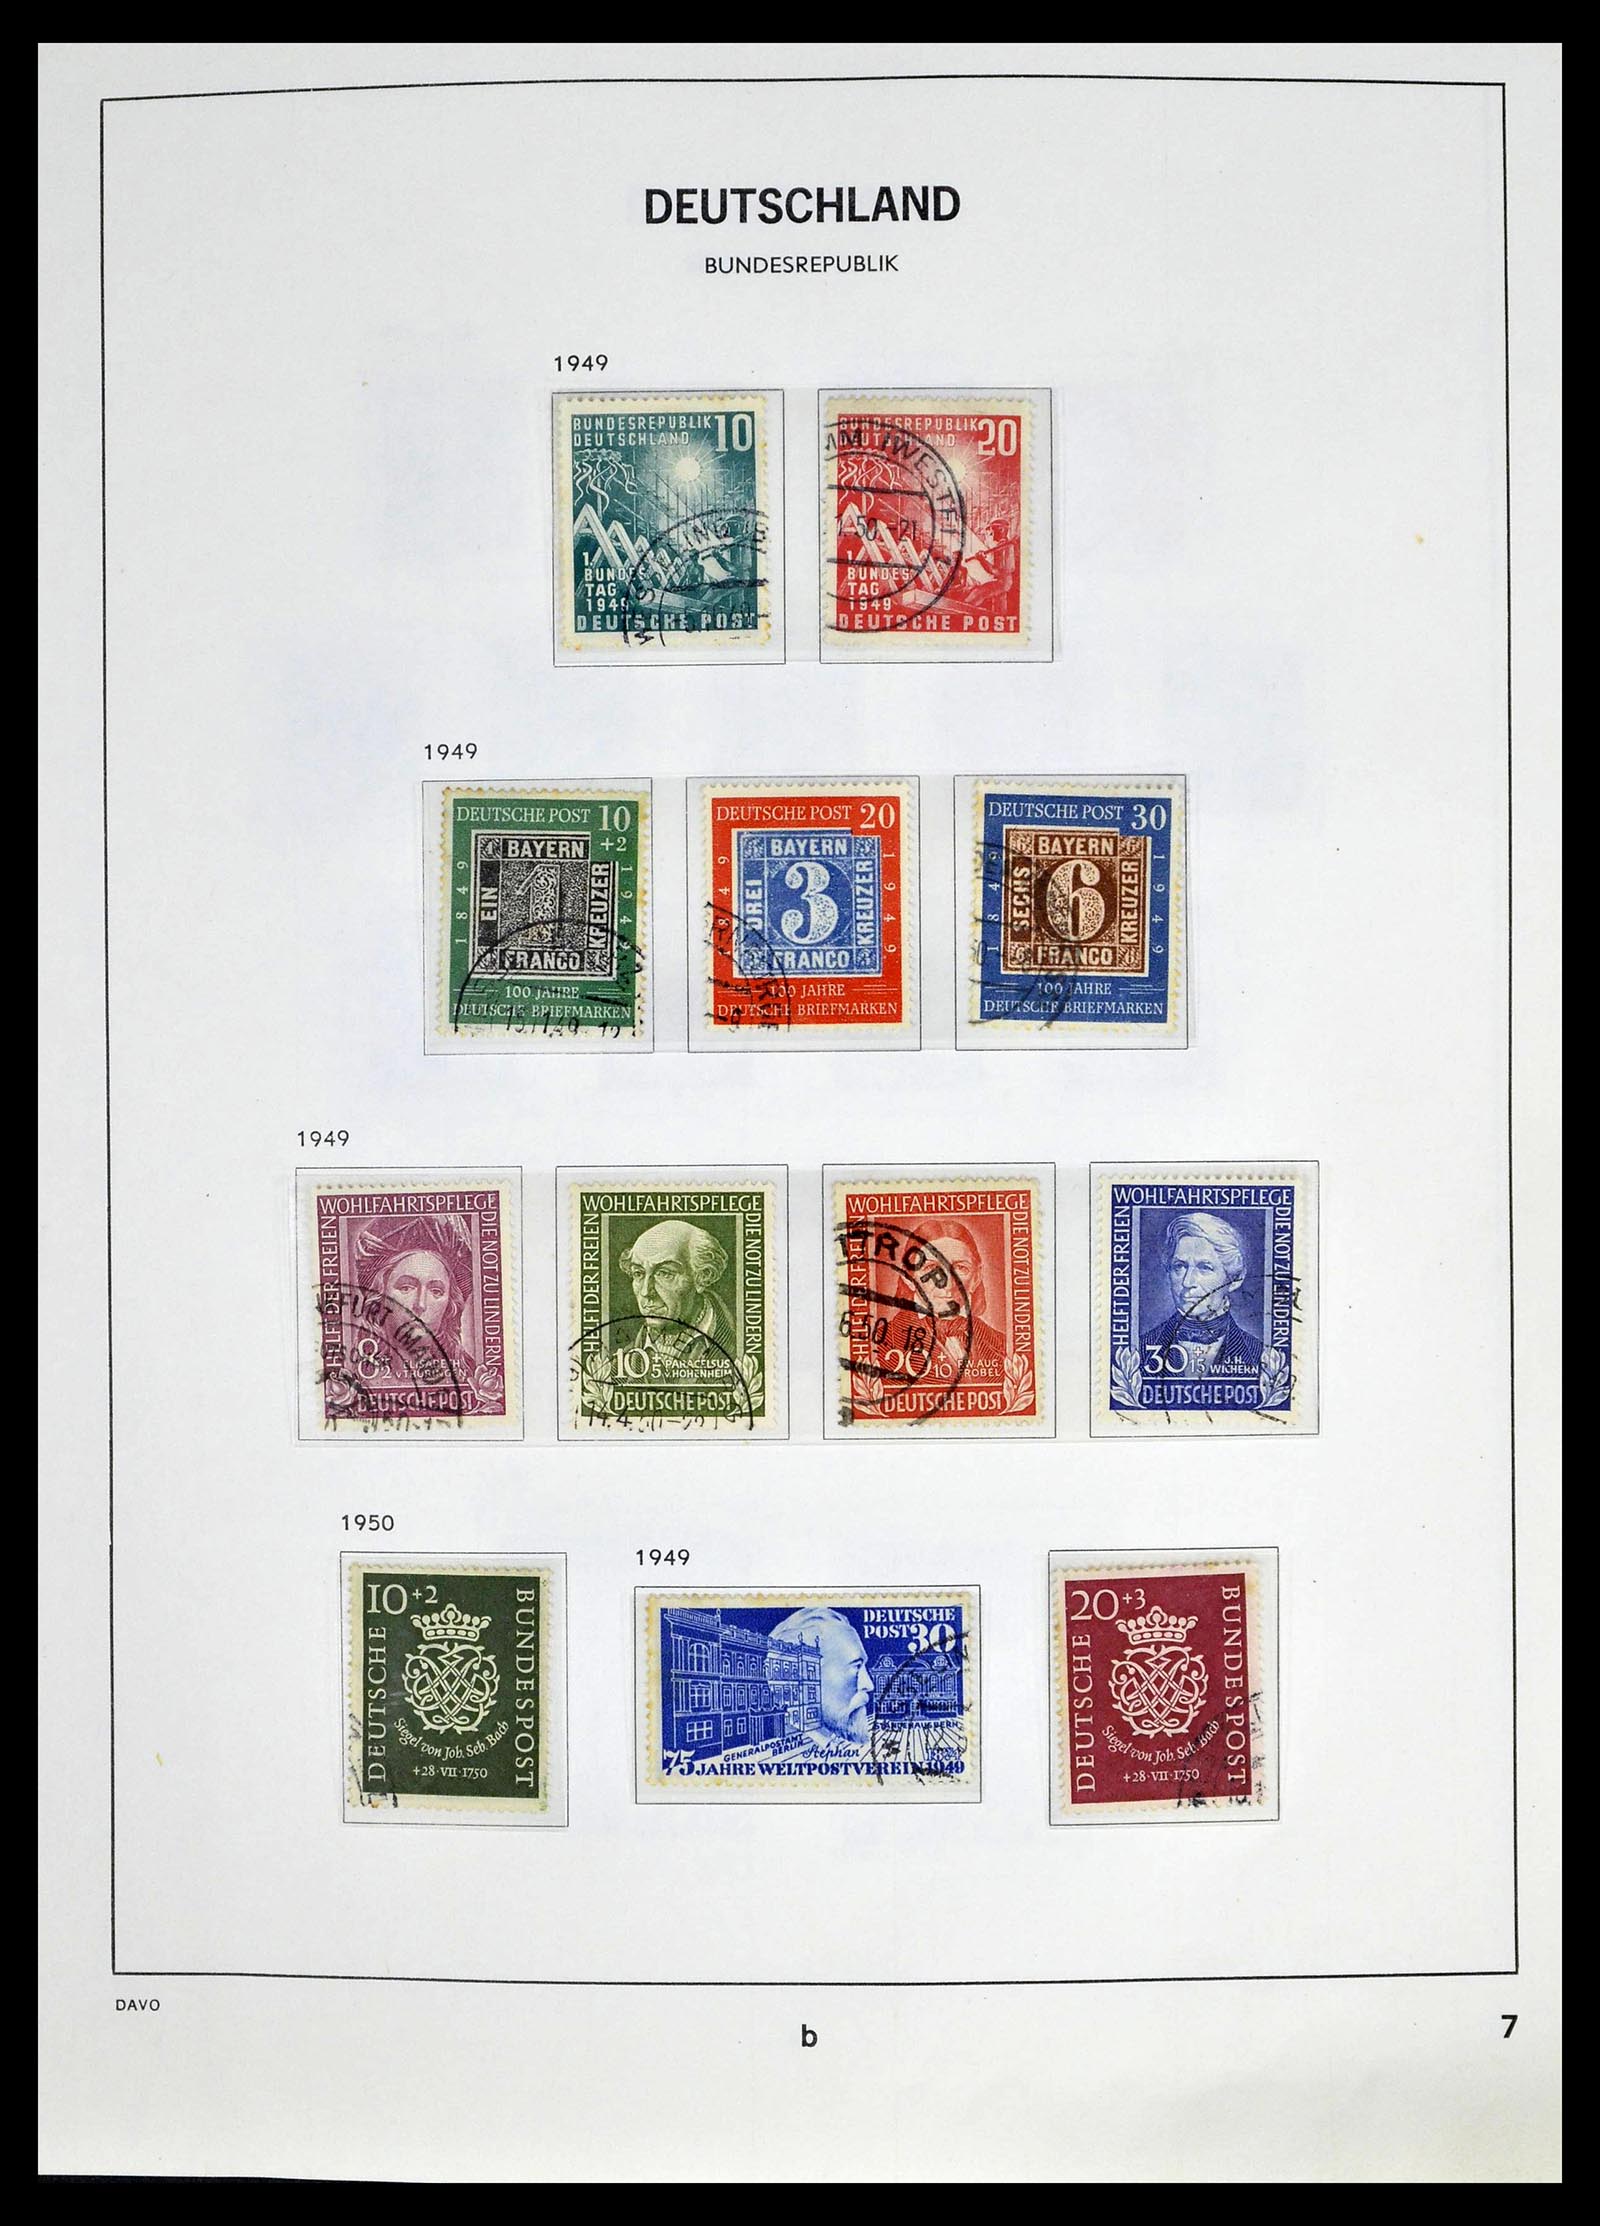 39326 0001 - Stamp collection 39326 Bundespost 1949-2003.